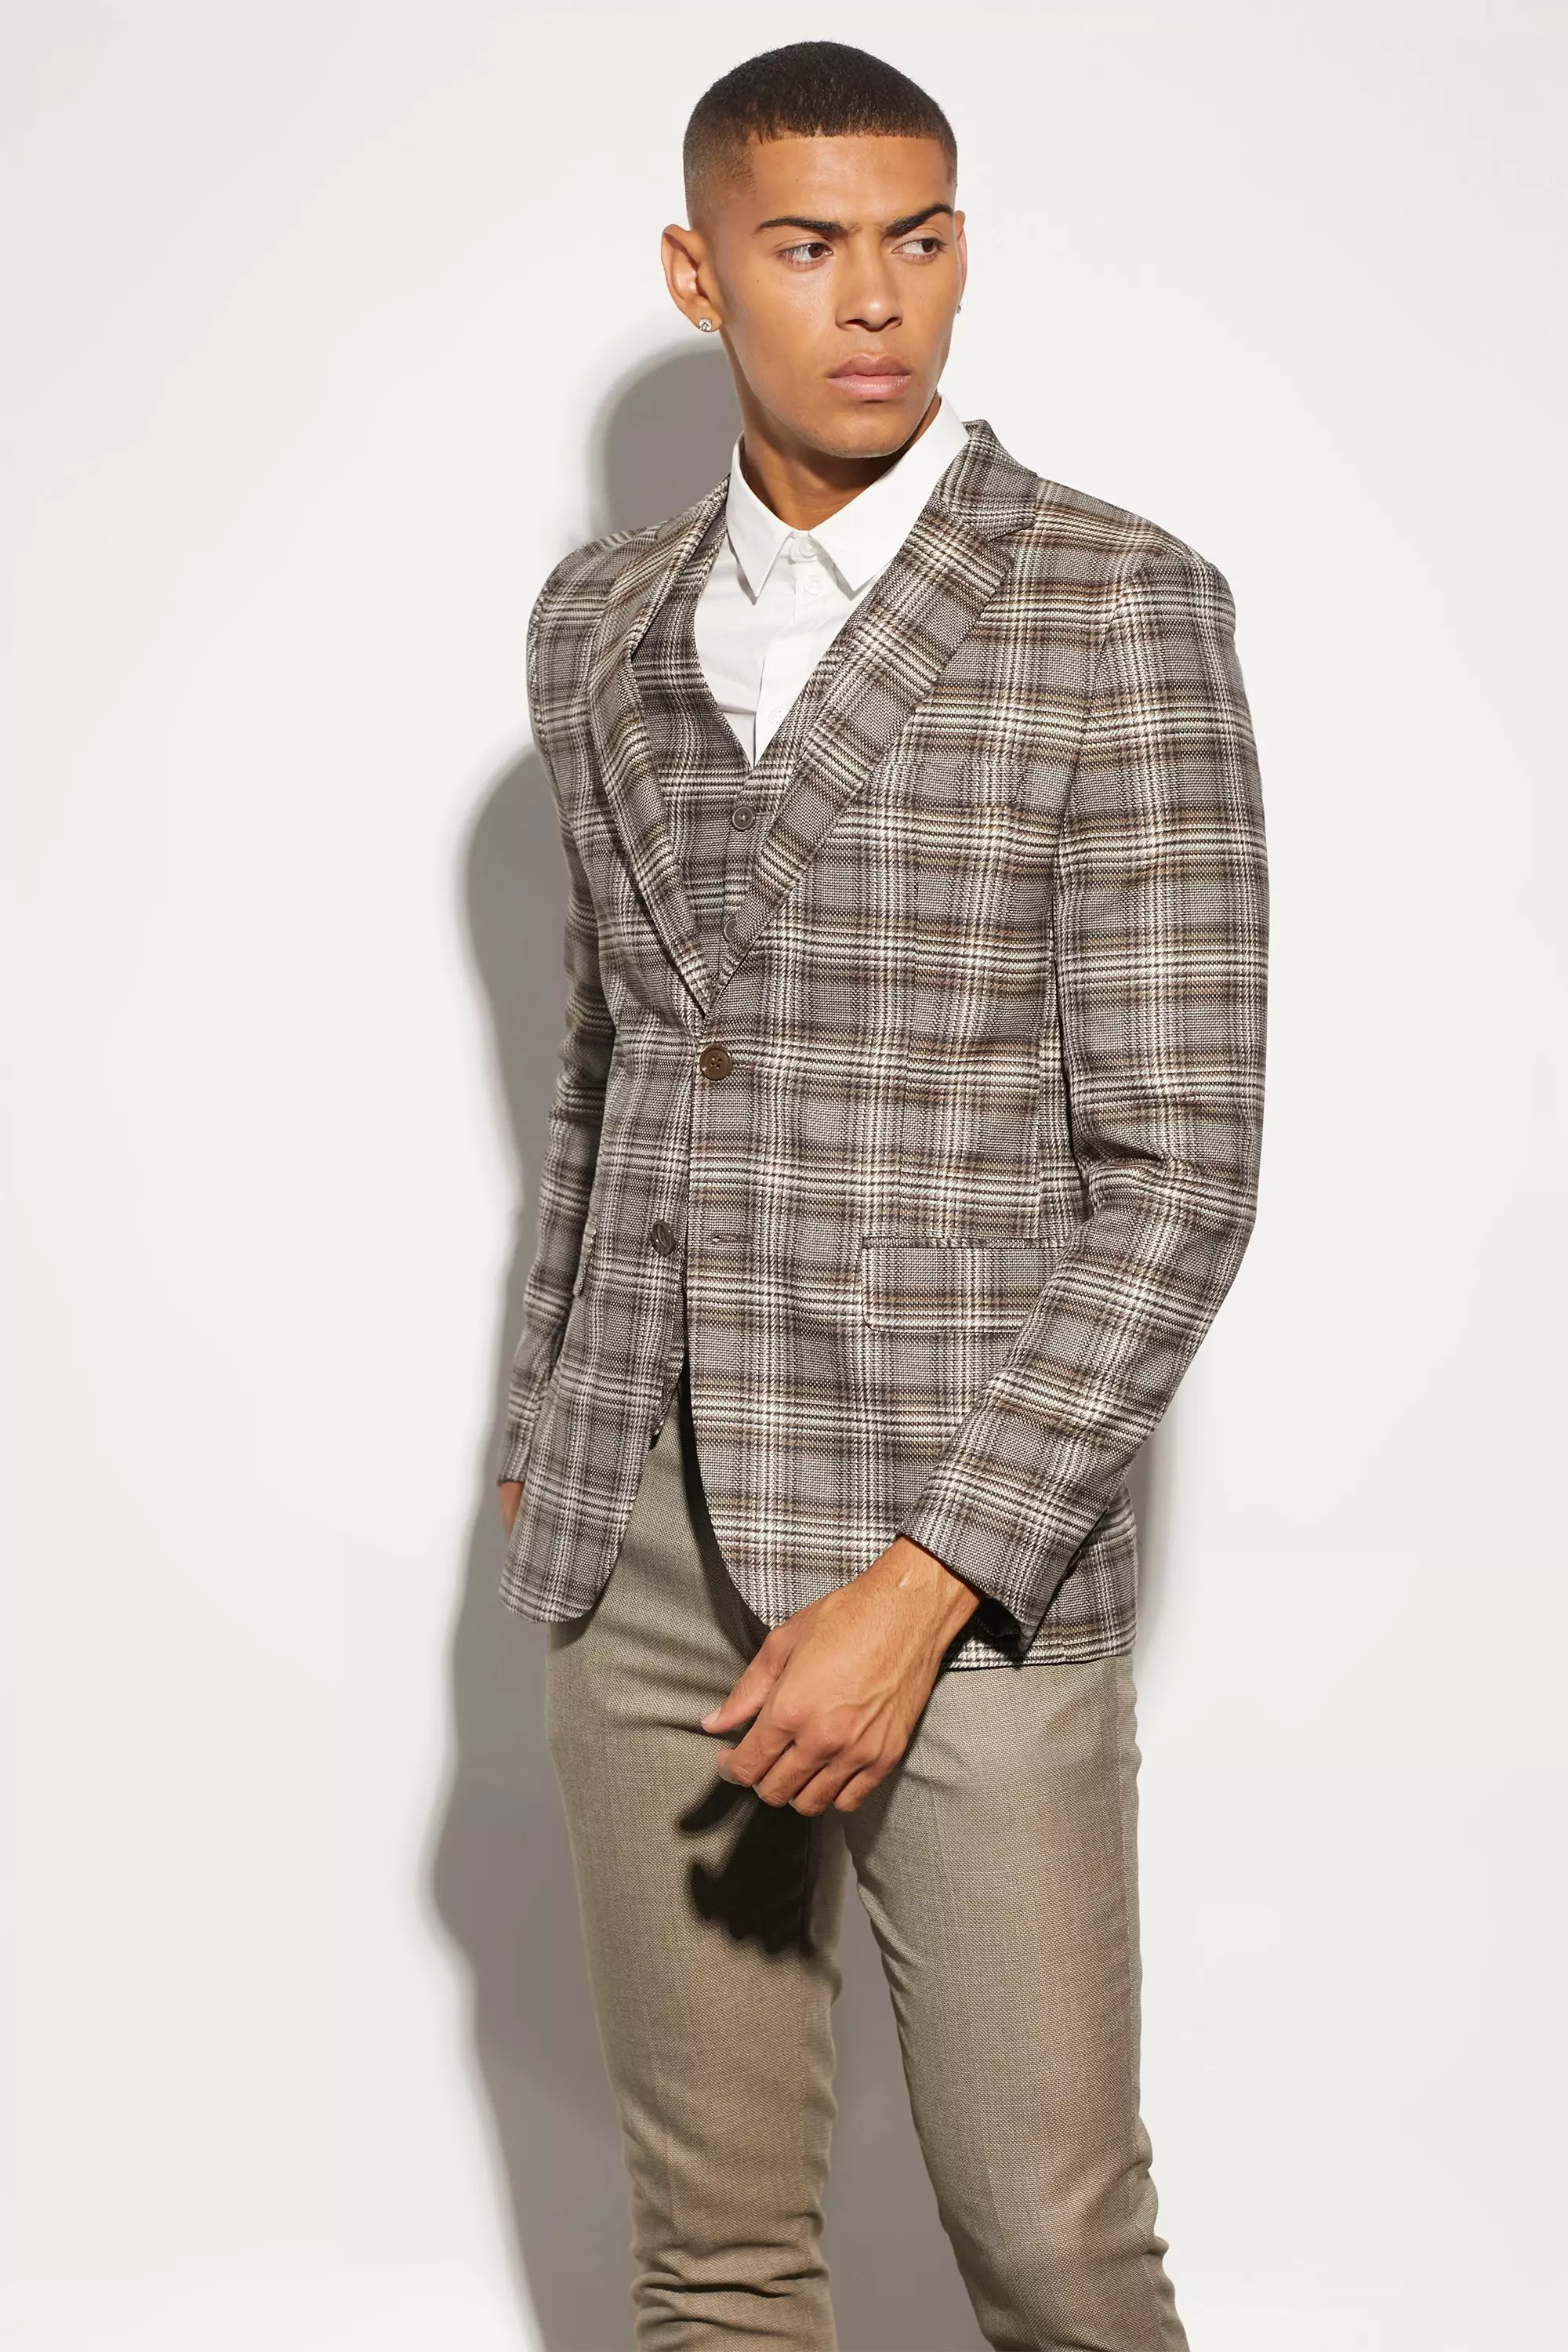 Skinny Single Breasted Check Suit Jacket Brown